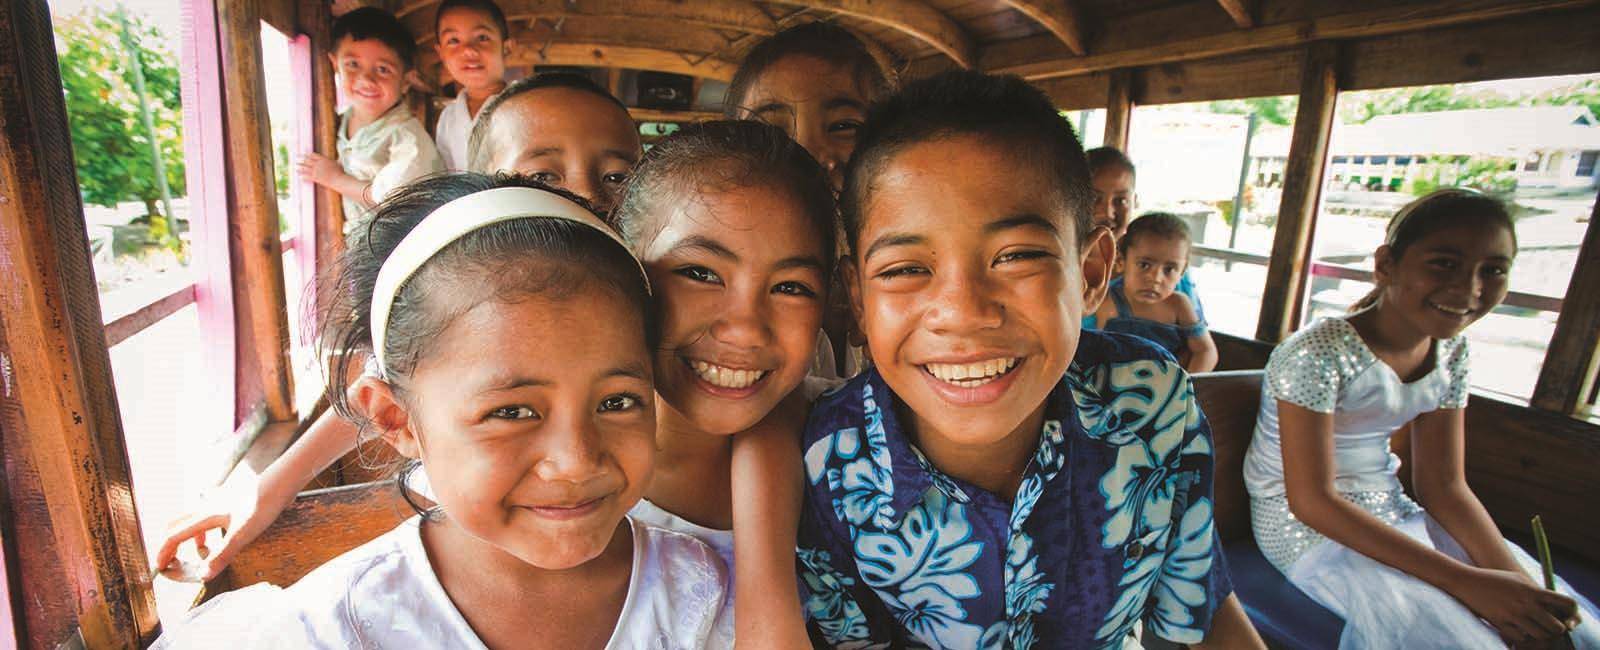 Samoans say they are the happiest people on Earth | See Samoa, get happy